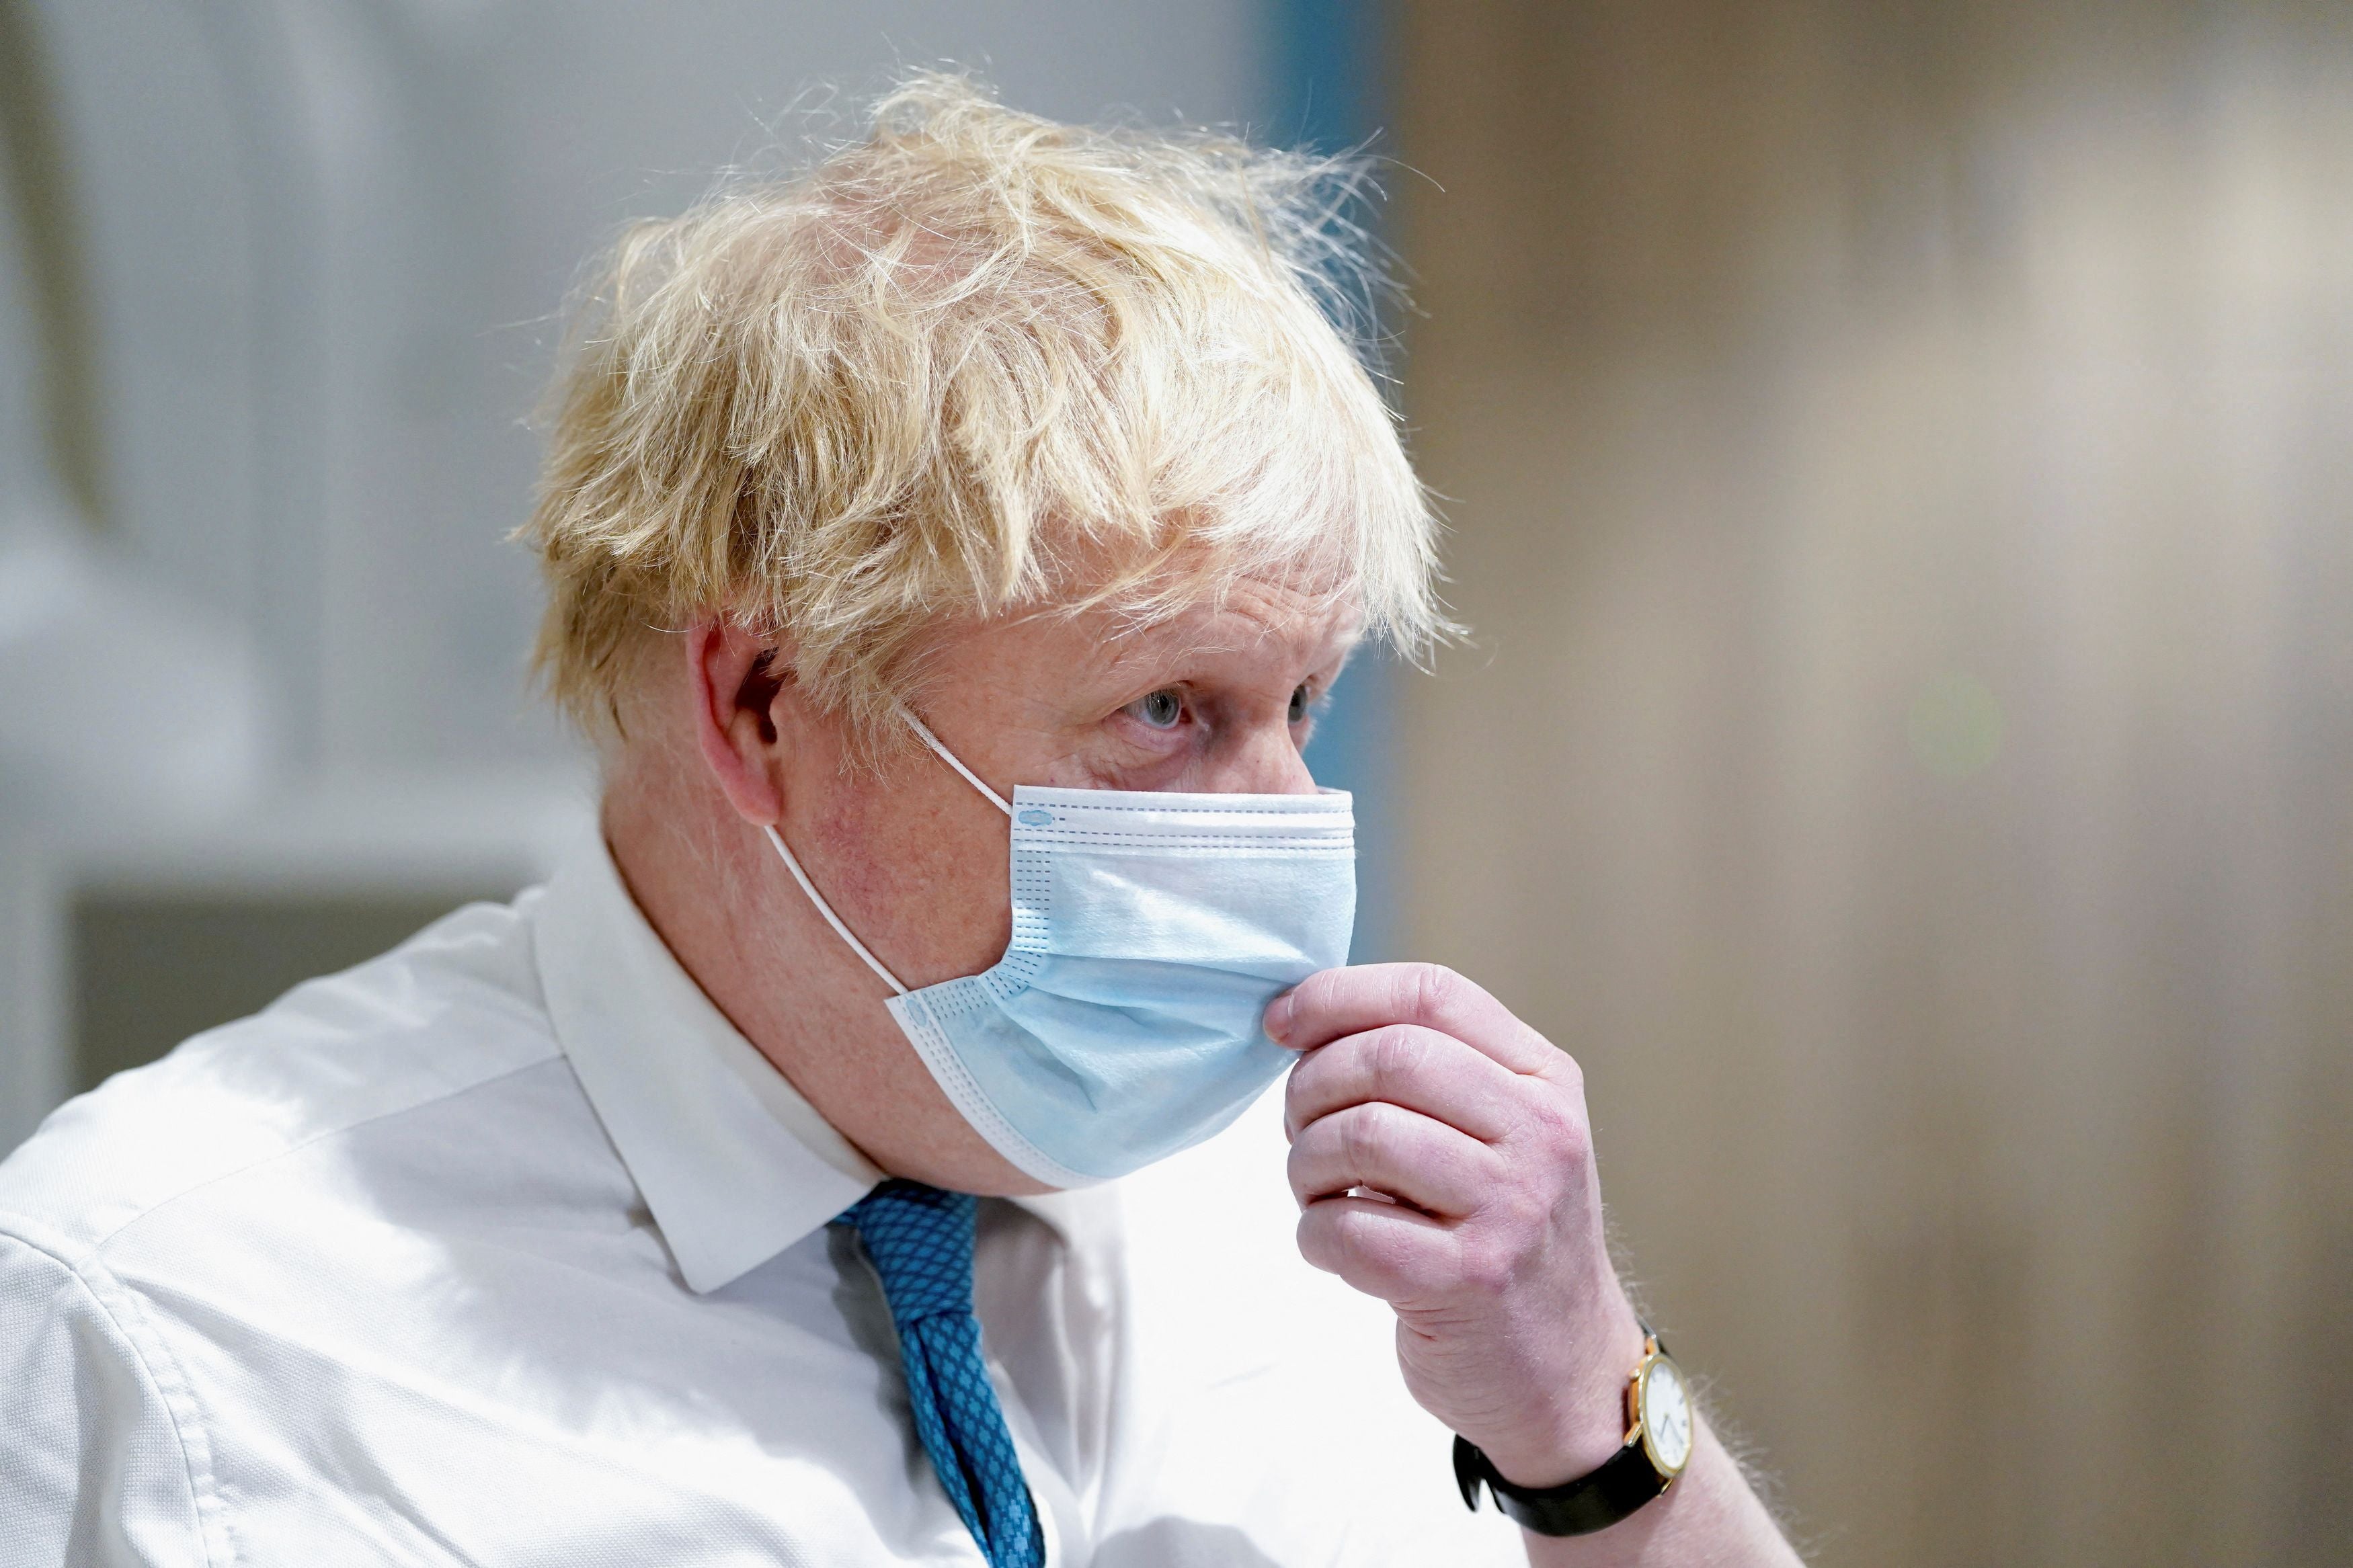 Boris Johnson was condemned by his former advisers for his handling of the pandemic